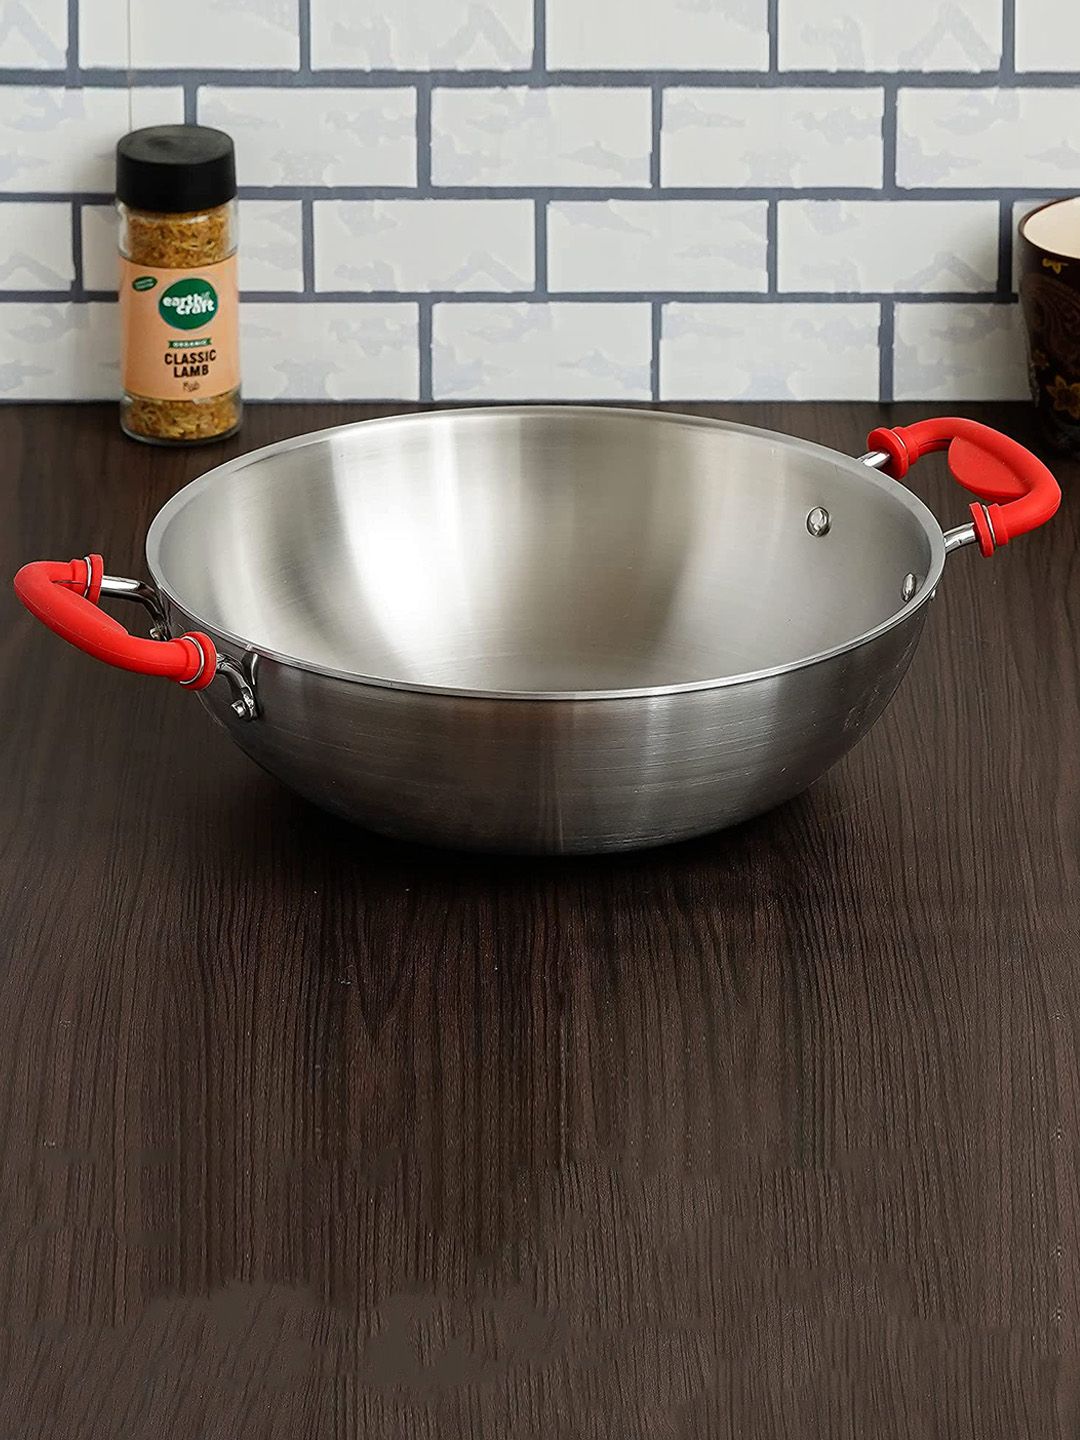 Femora Stainless Steel Tri-ply Frying Kadhai Pan with Silicone Handle 26 cm Capacity 3.2 L Price in India